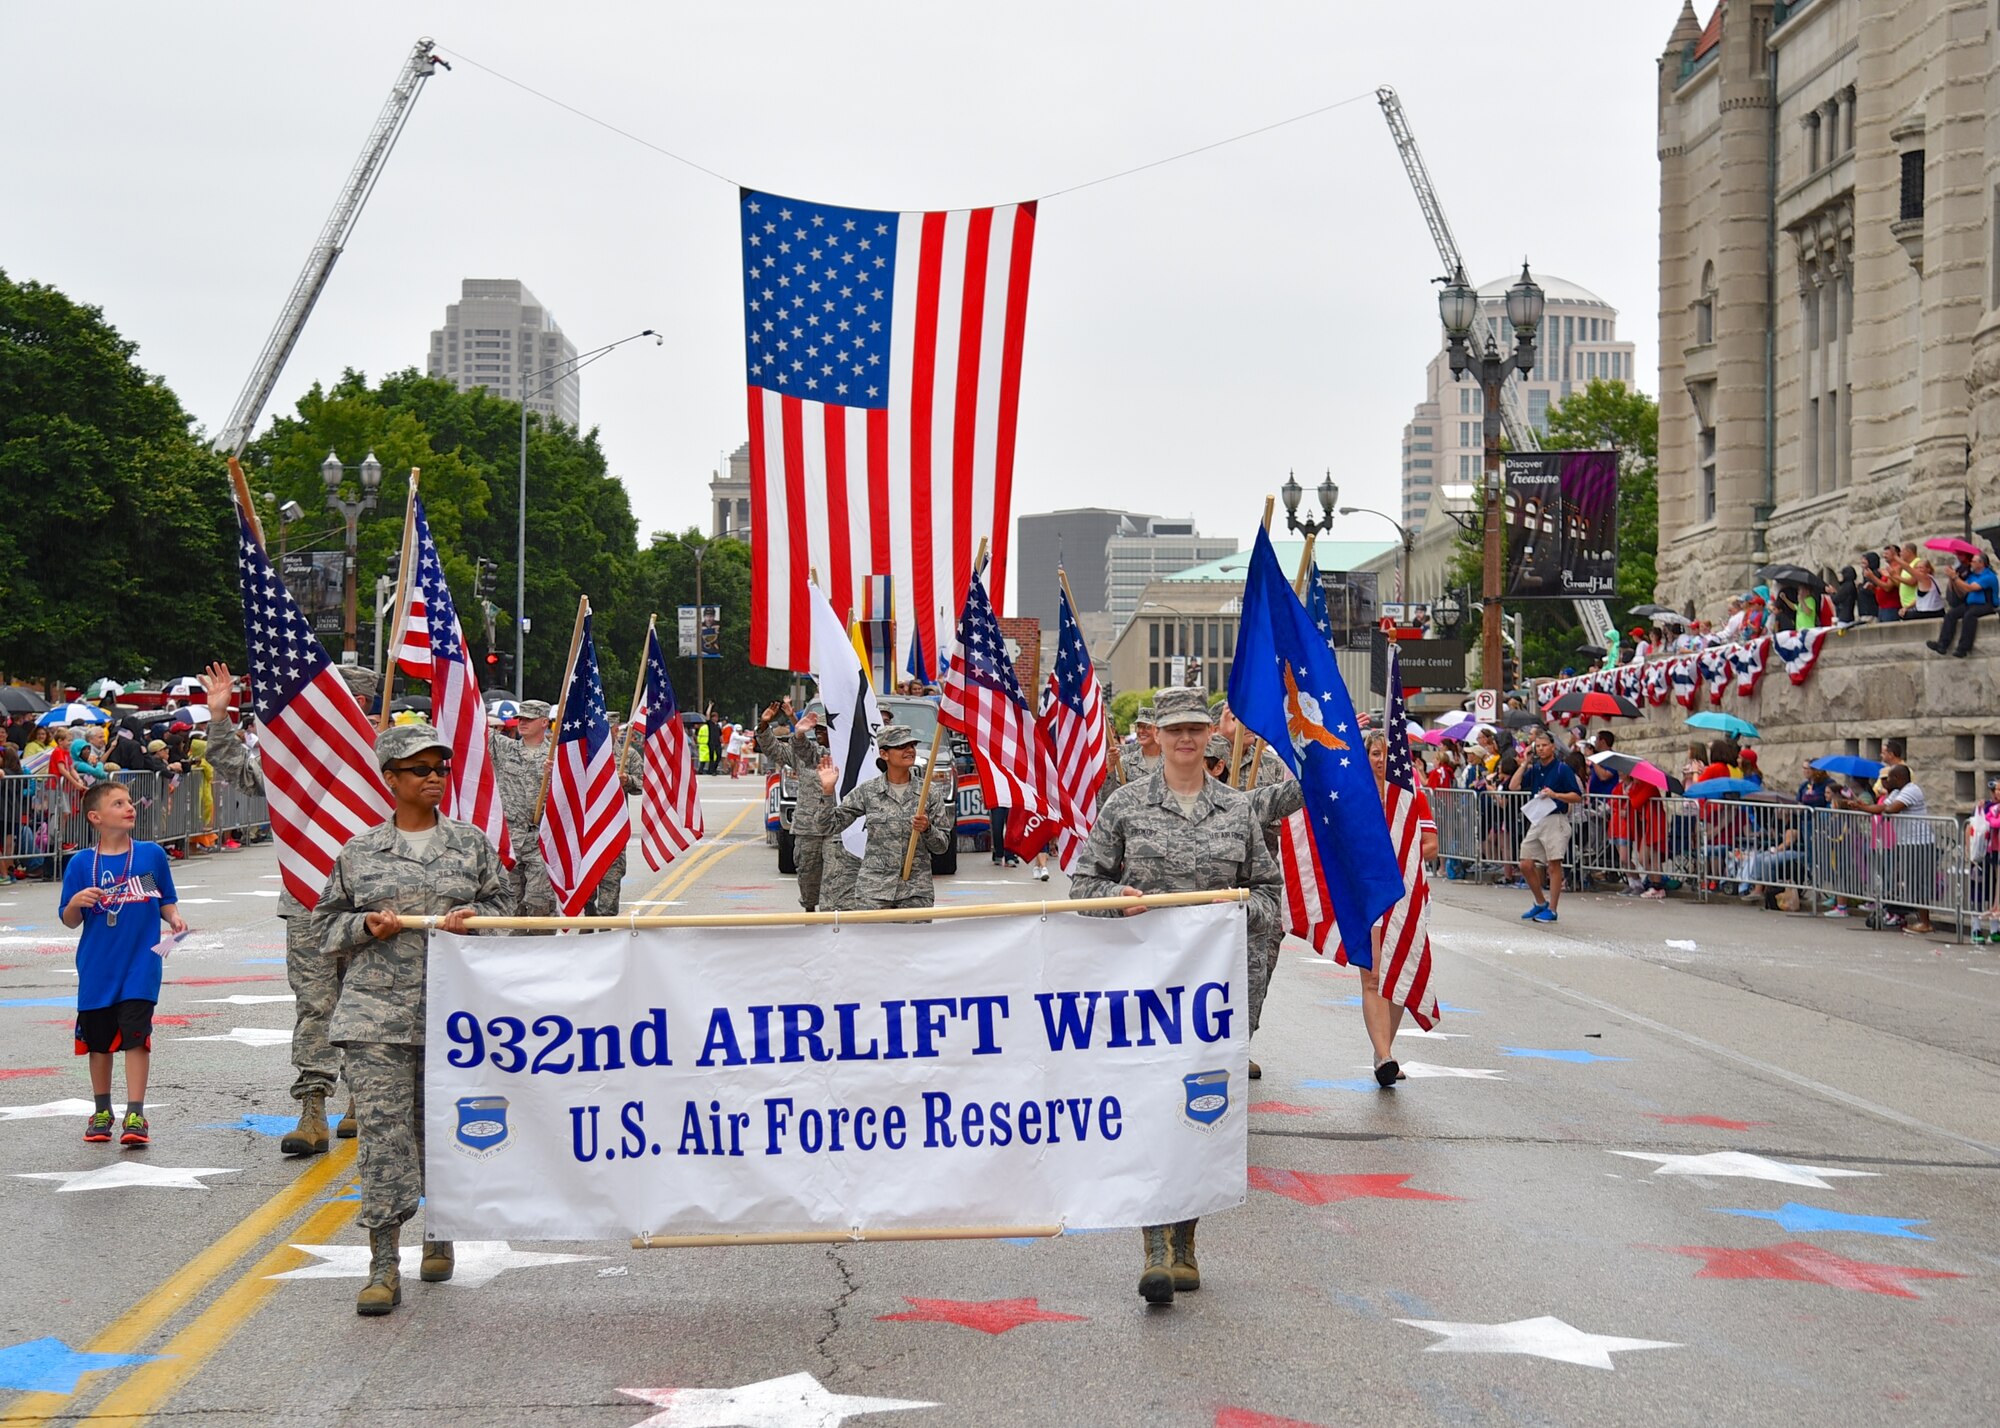 22nd Air Force was represented in the middle of America as the commander of the 932nd Airlift Wing, Col. Jonathan Philebaum, led his wing volunteers on a 1.5 mile walk in the Saint Louis Independence Day "VP" parade July 2, 2016. The Illinois Air Force Reserve Command unit, located at Scott Air Force Base, flies the C-40C aircraft for distinguished visitor airlift. (U.S. Air Force photo by Tech. Sgt. Christopher Parr)